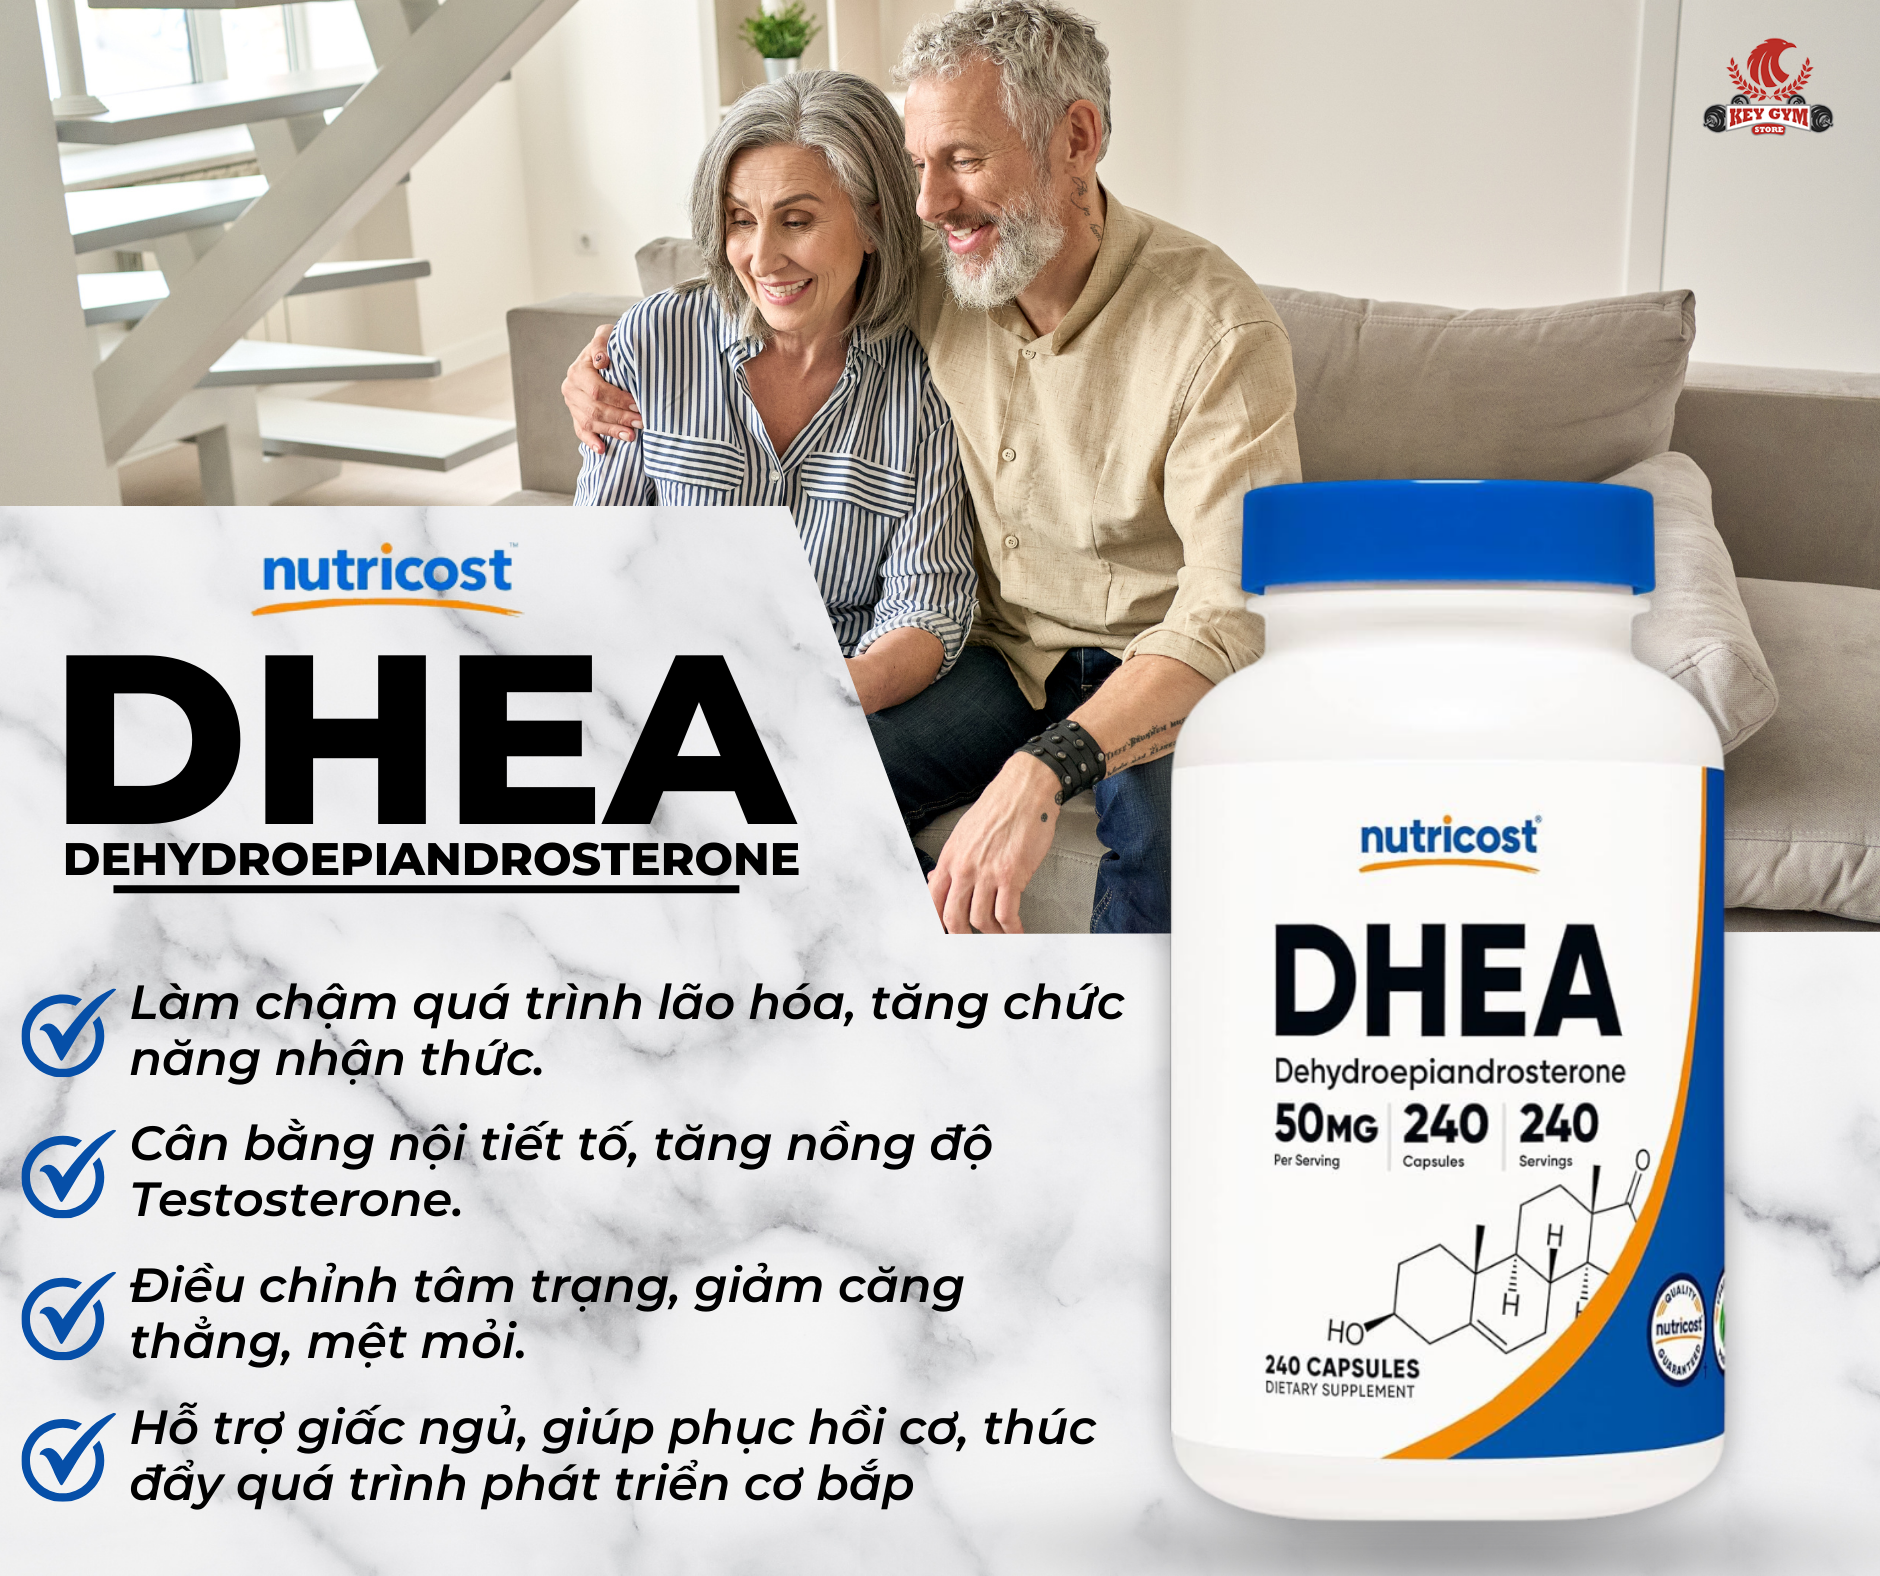 Nutricost DHEA